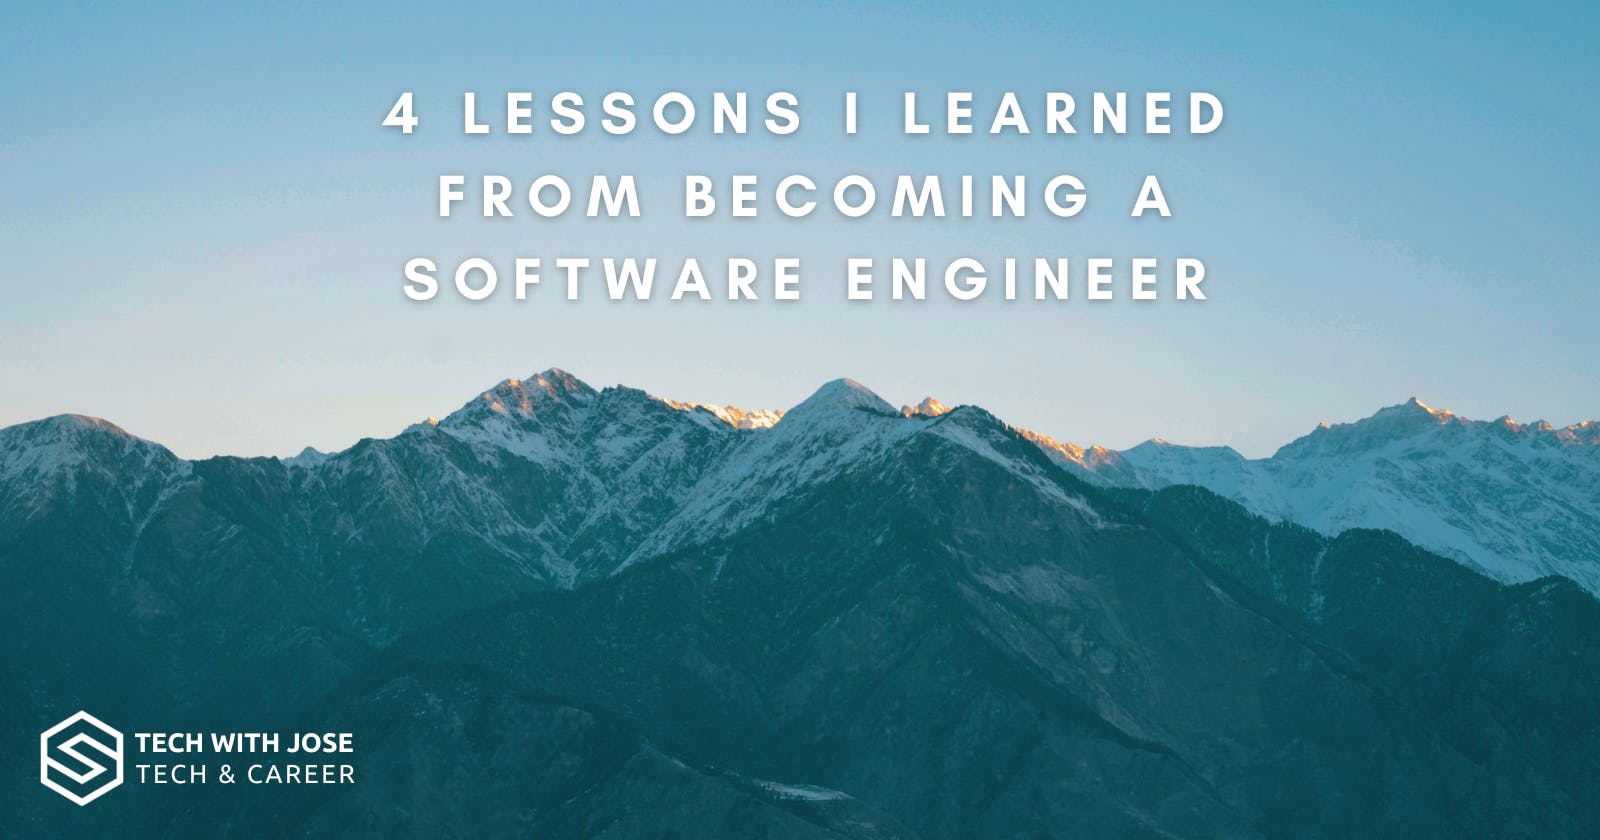 4 Lessons I learned from becoming a Software Engineer